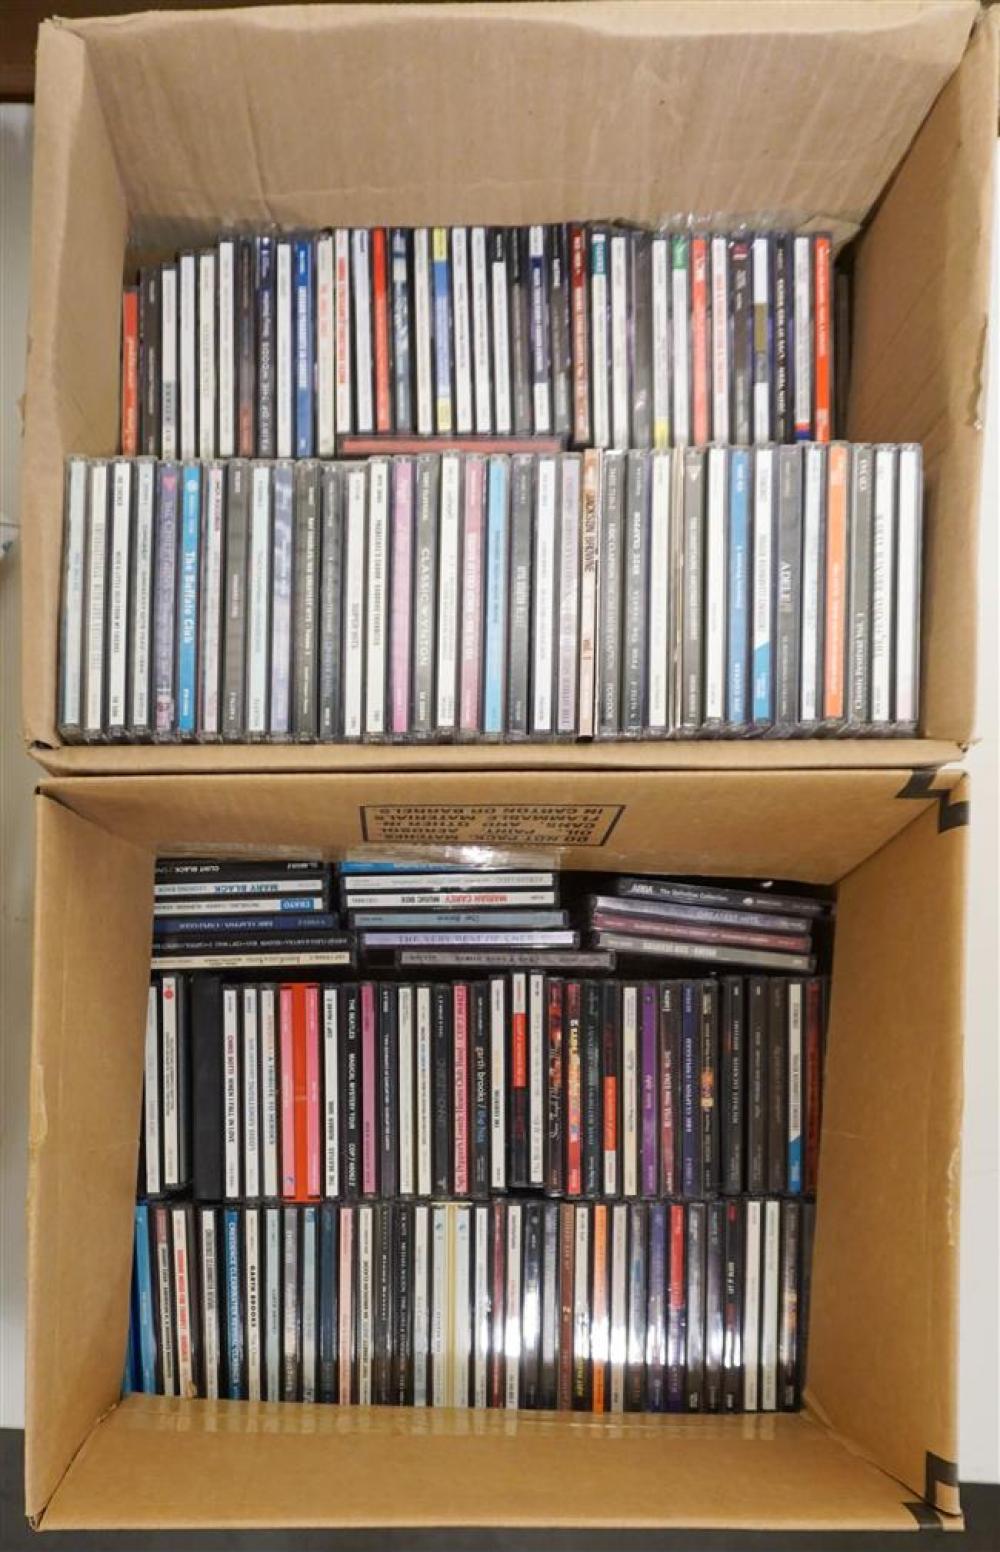 TWO BOXES OF CDSTwo Boxes of CDs